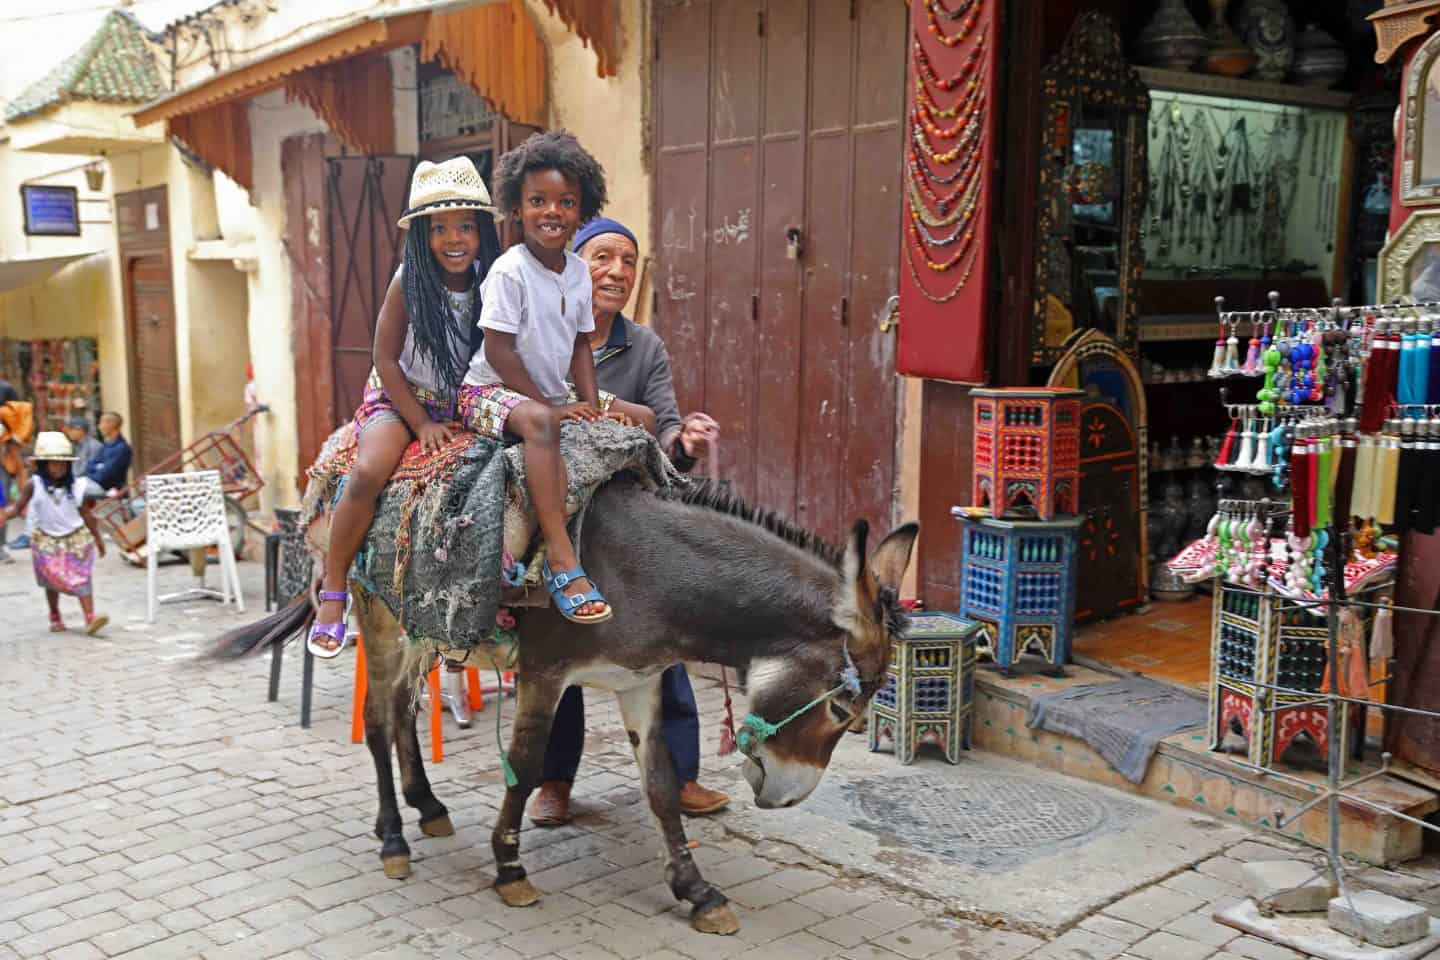 kids riding a donkey in Morocco